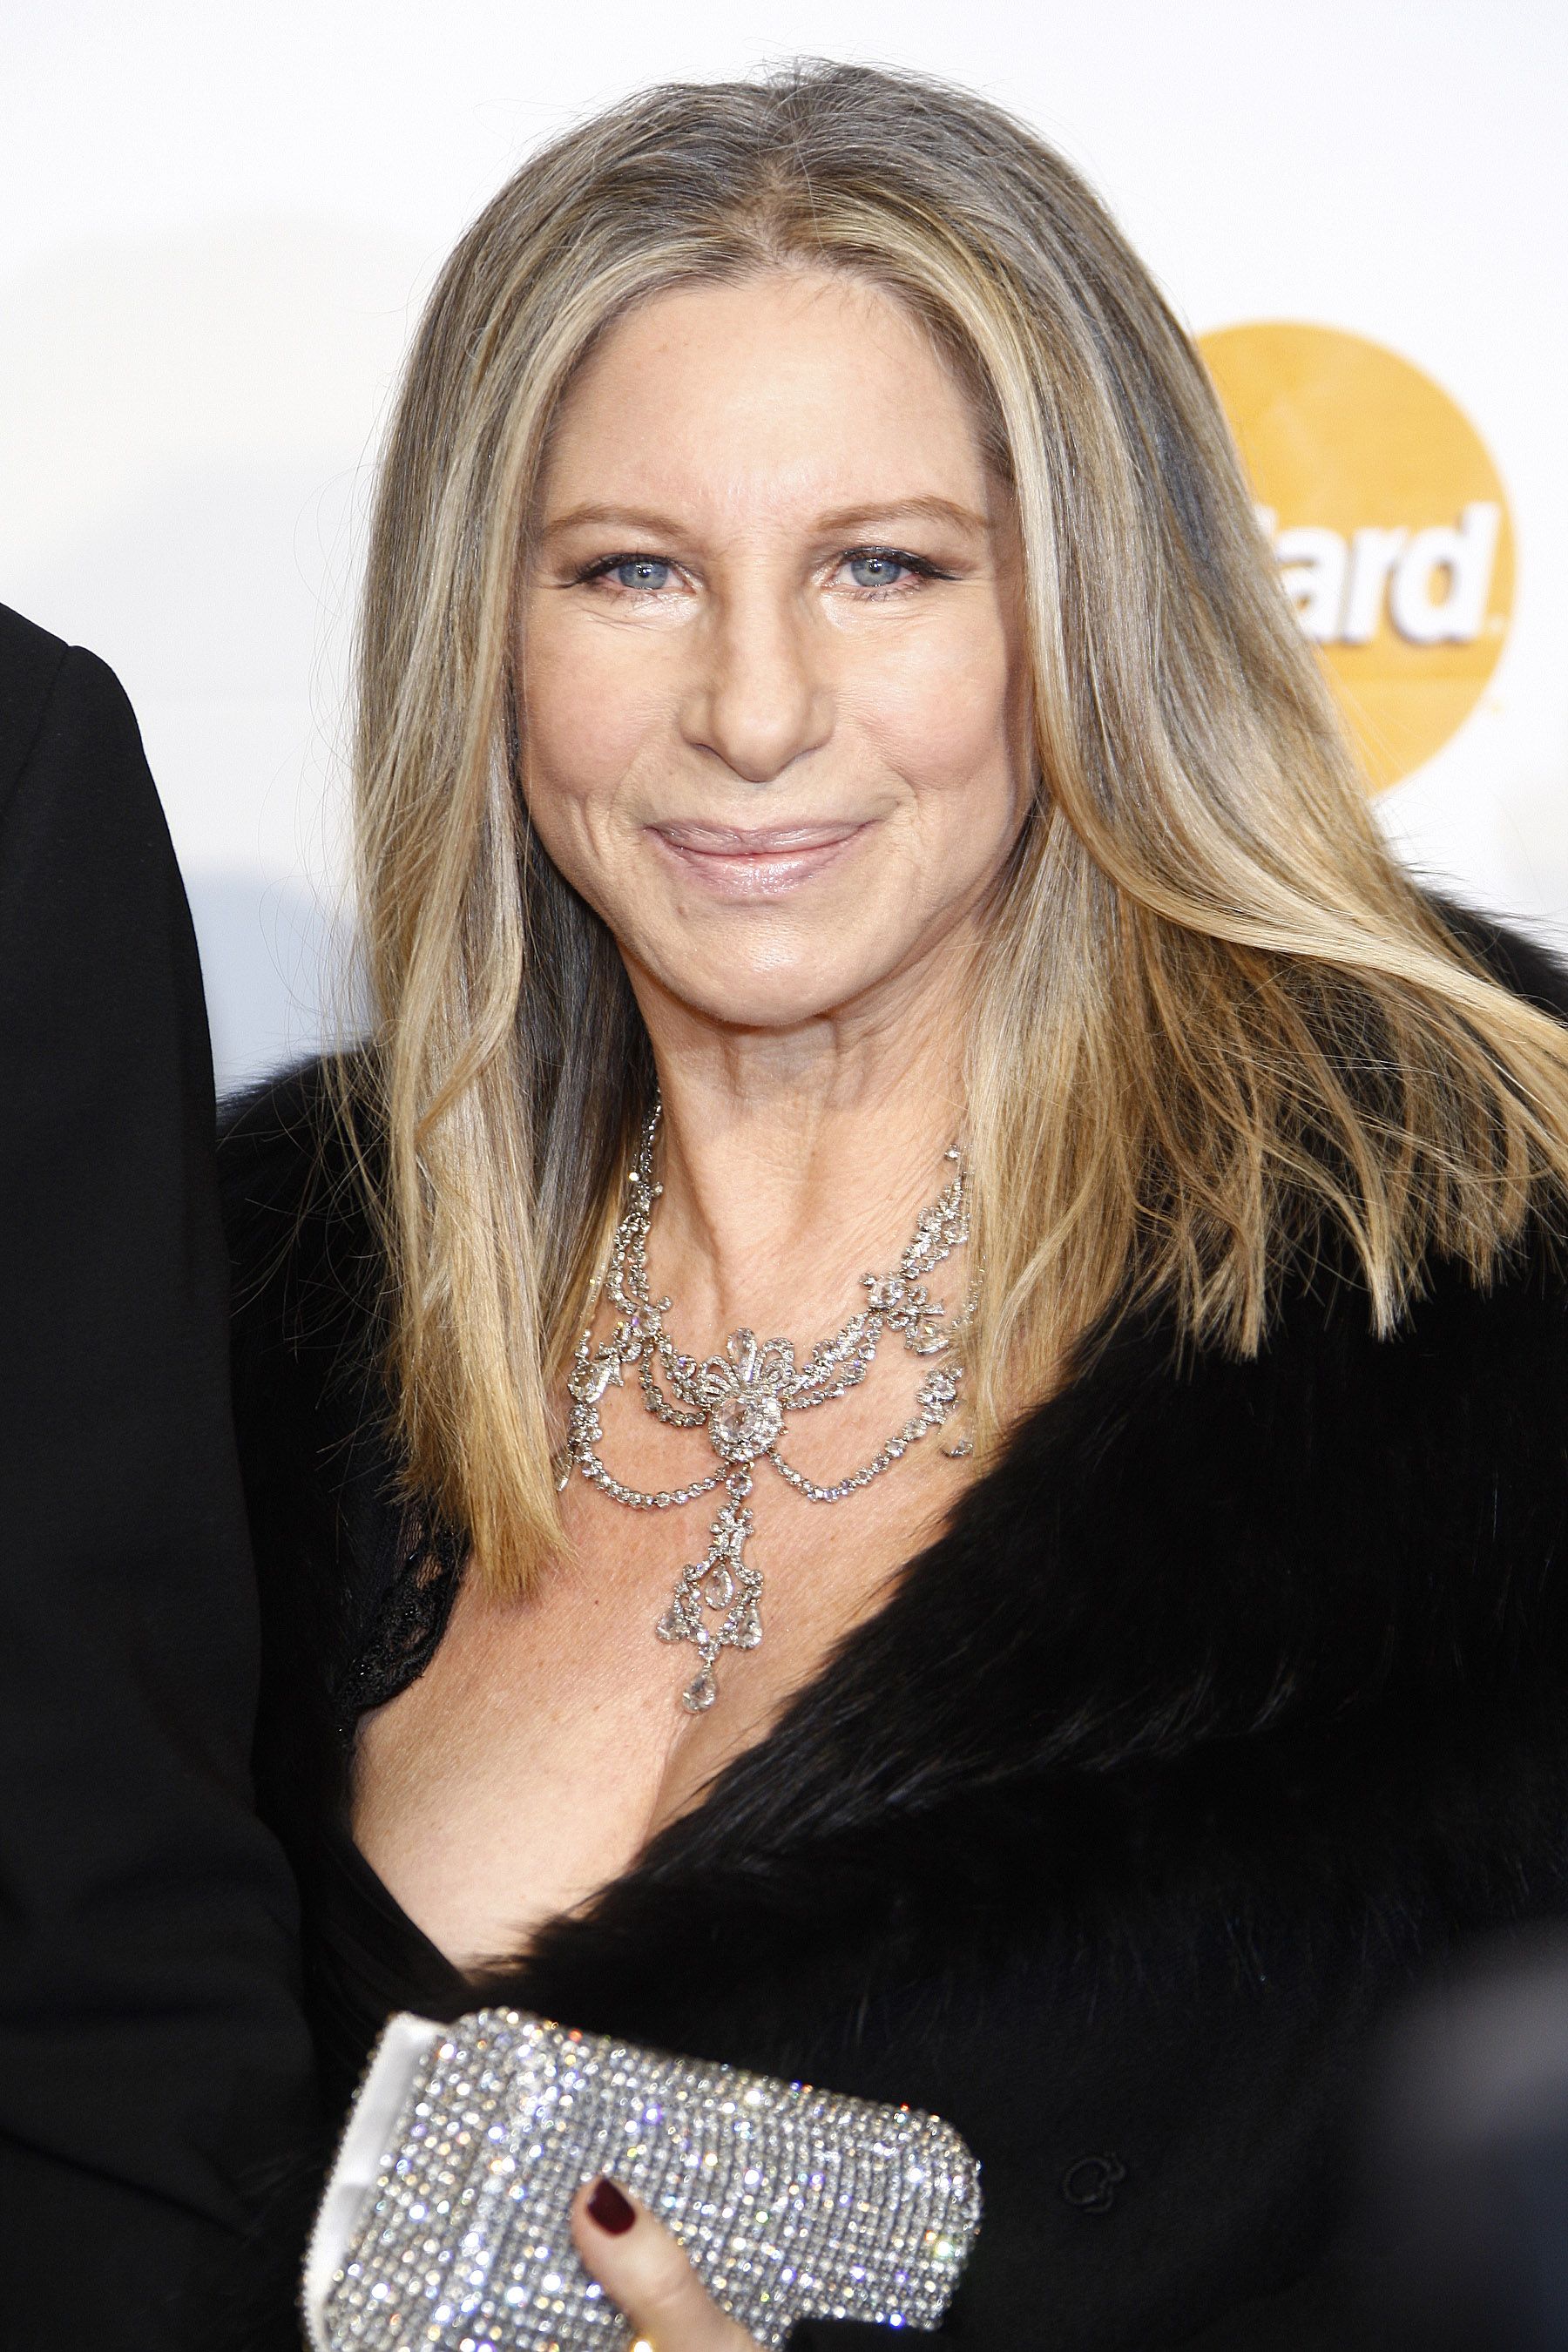 Barbra Streisand at the Musicares Person of the Year Gala